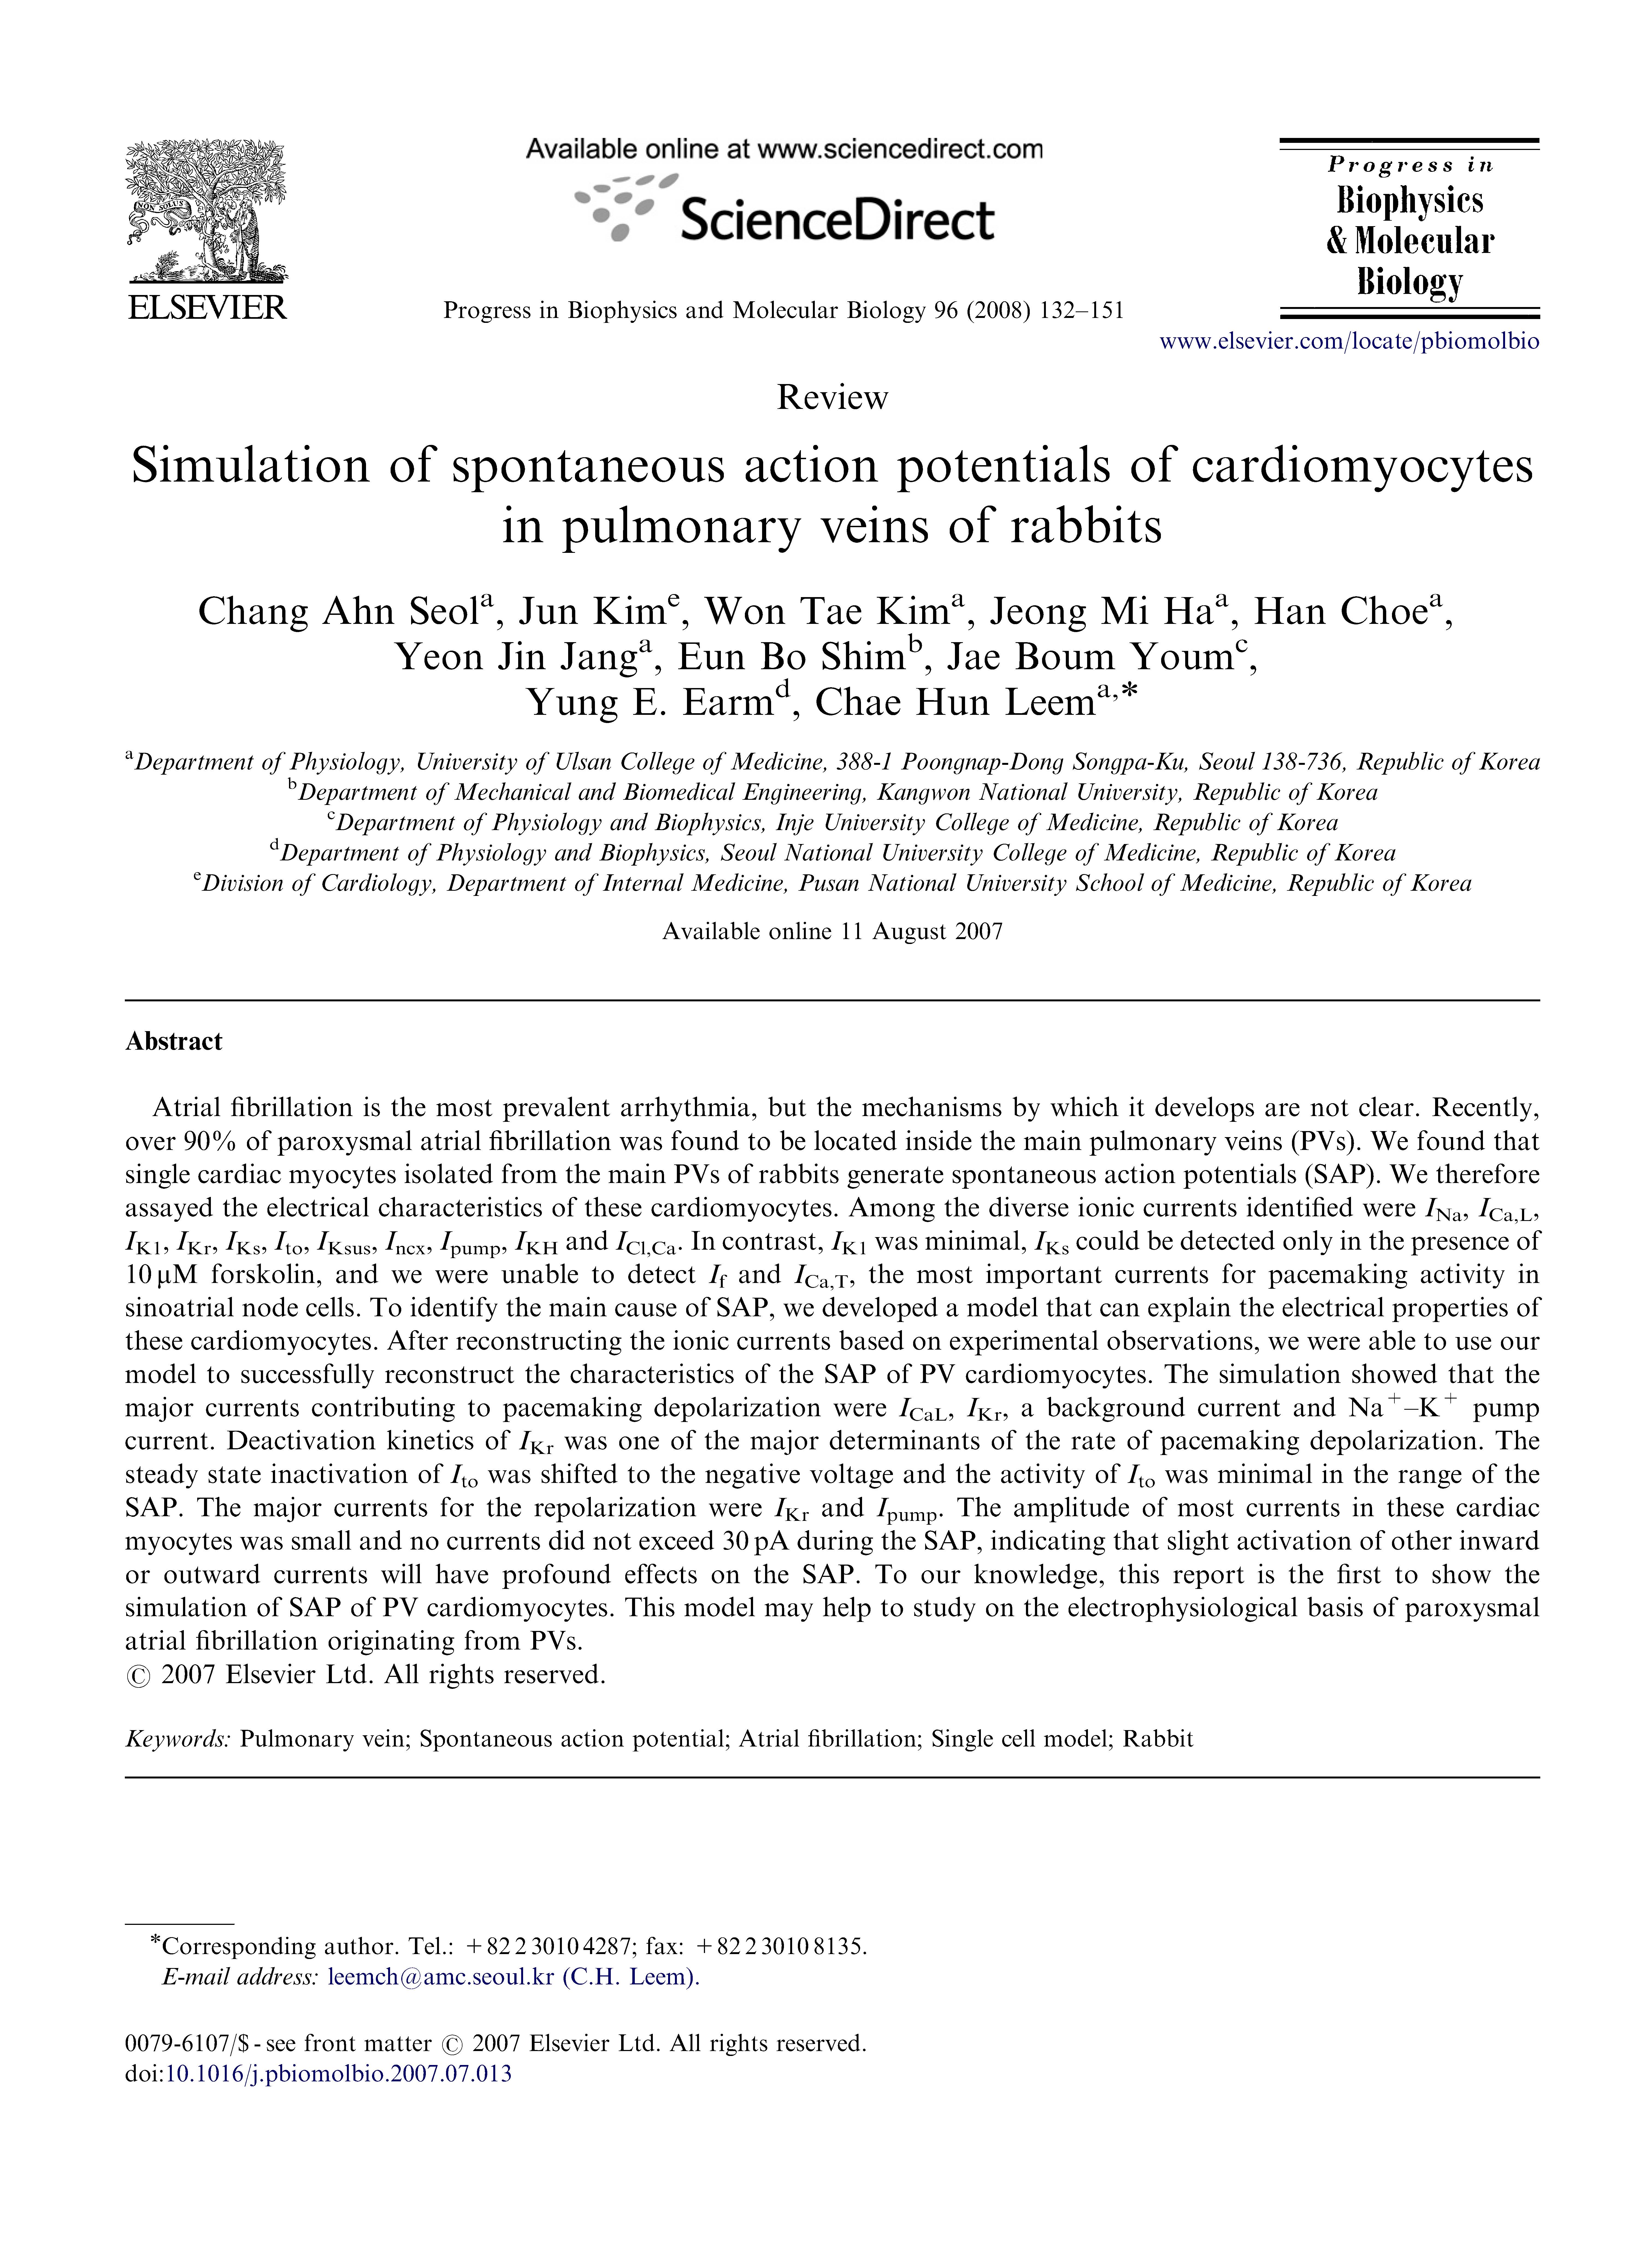 Simulation of spontaneous action potentials of cardiomyocytes in pulmonary veins of rabbits.jpg 6048X8263